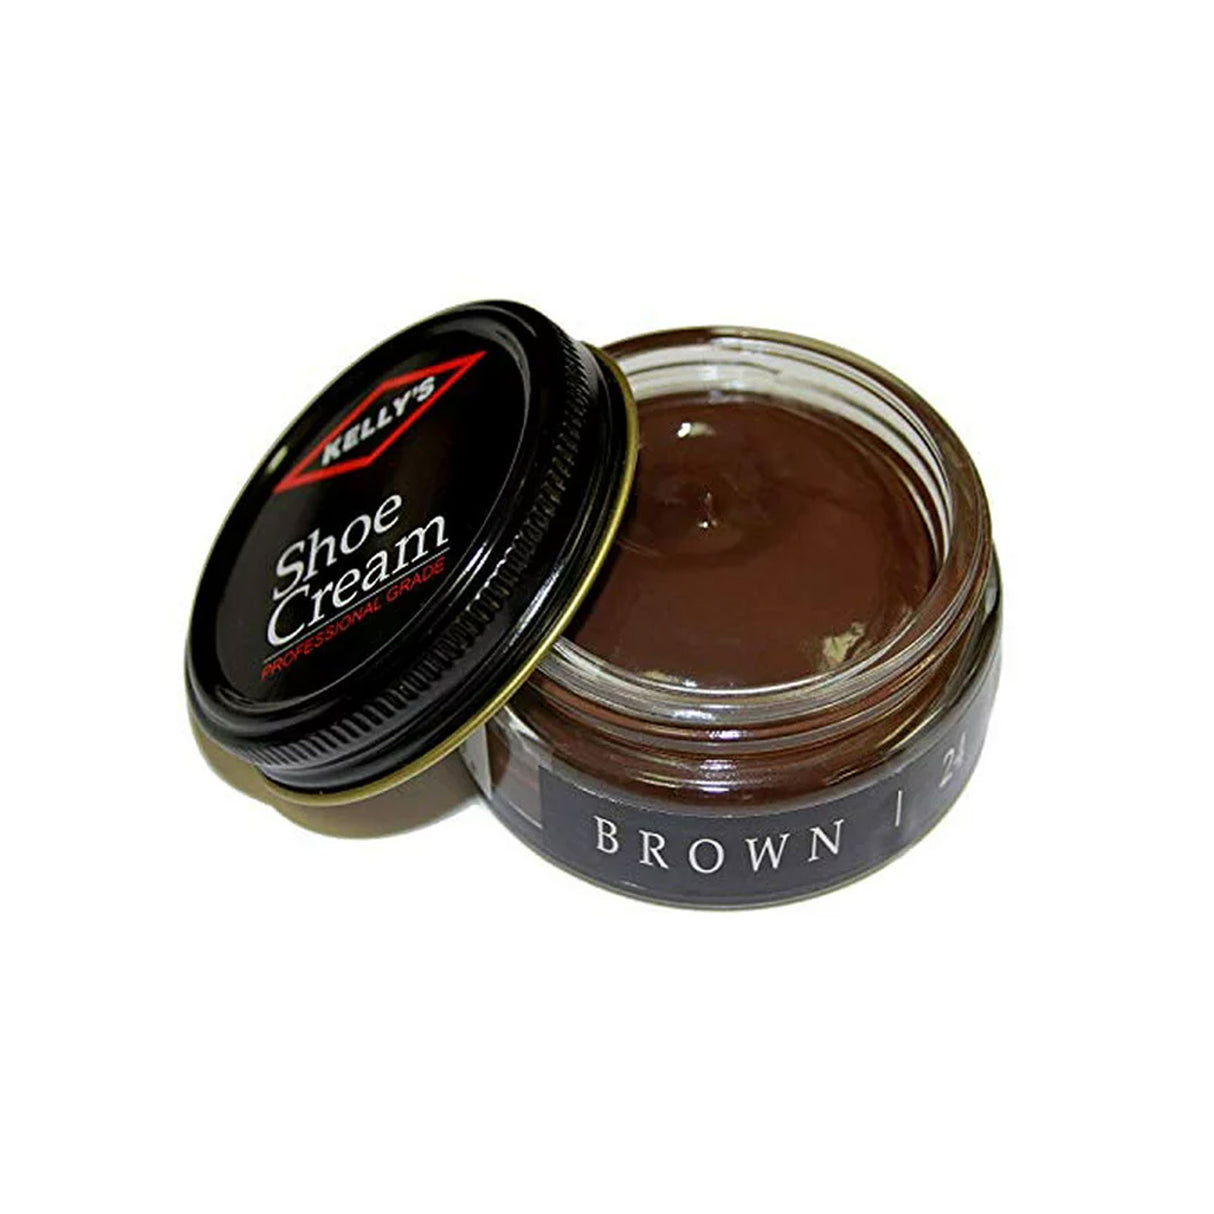 Kelly's Shoe Polish - Brown Accessories - Shoe Care - The Heel Shoe Fitters